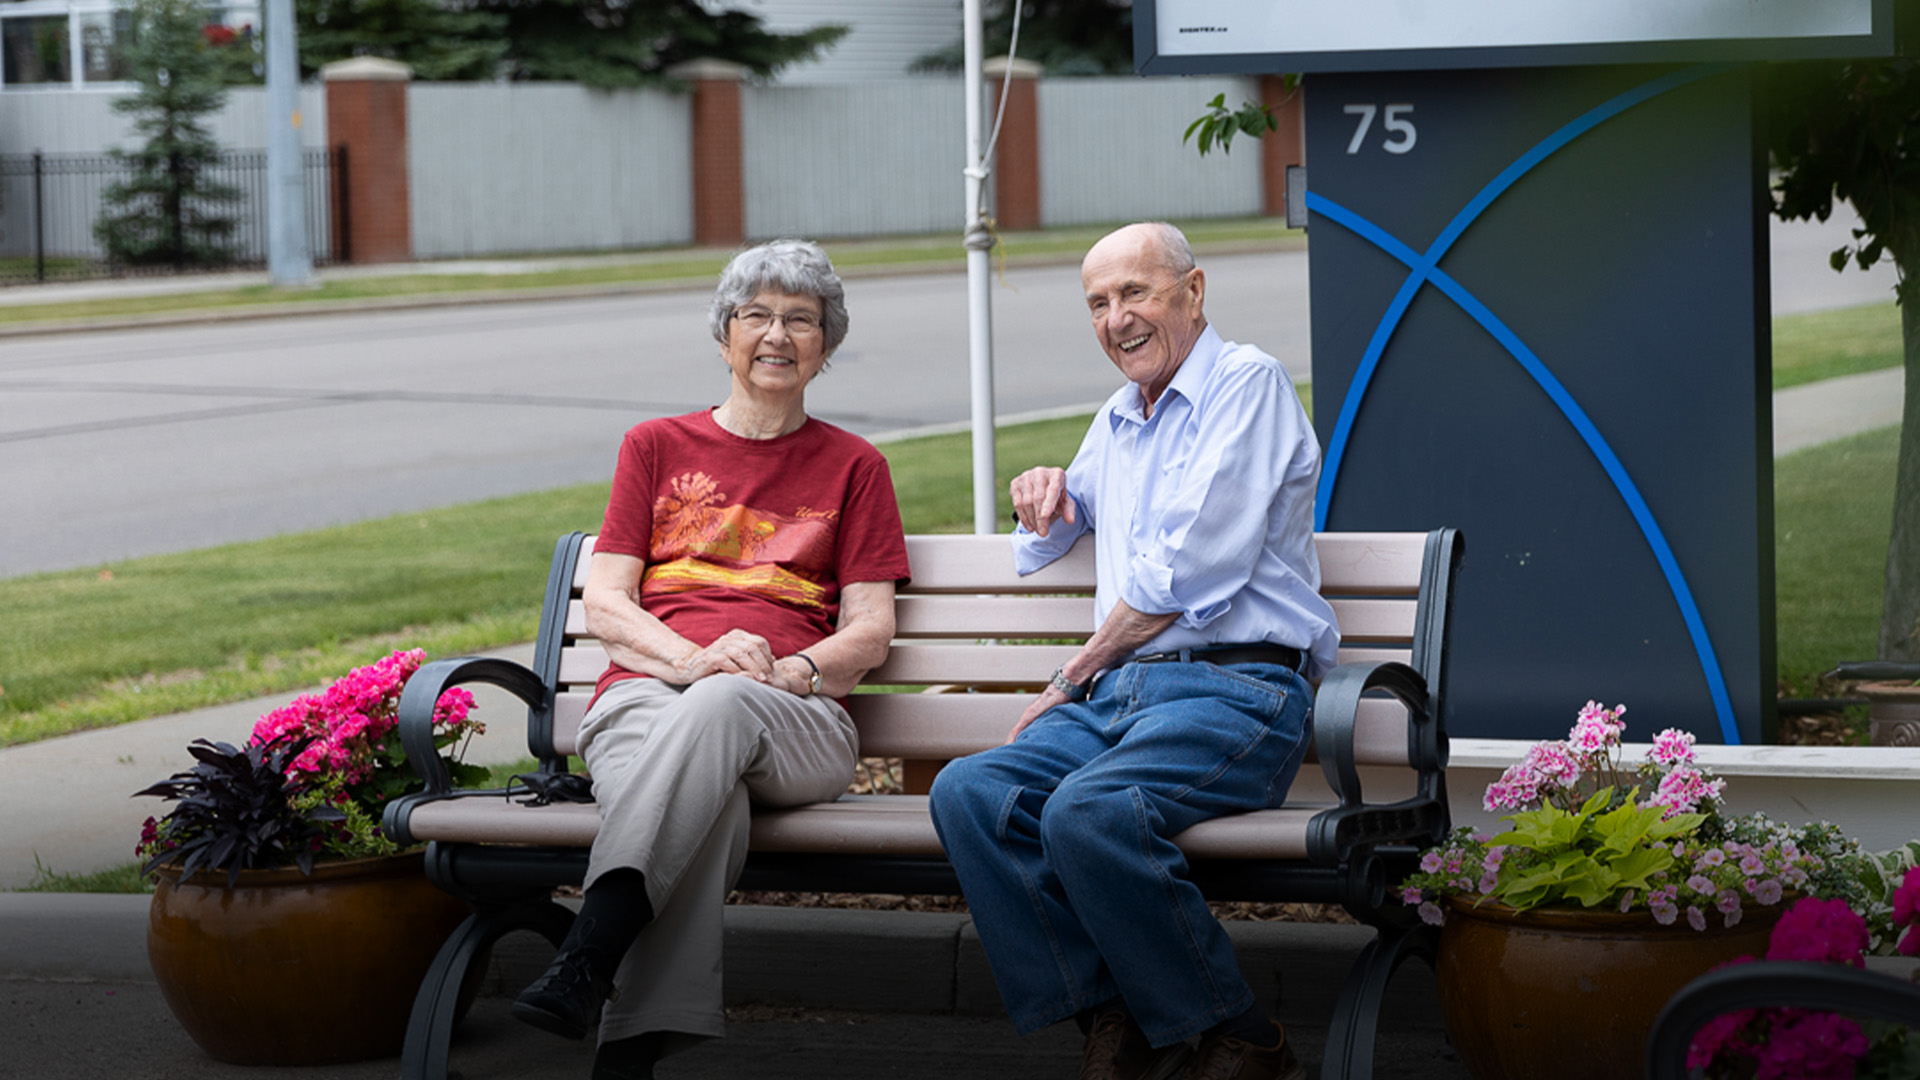 Two seniors seated on a bench together